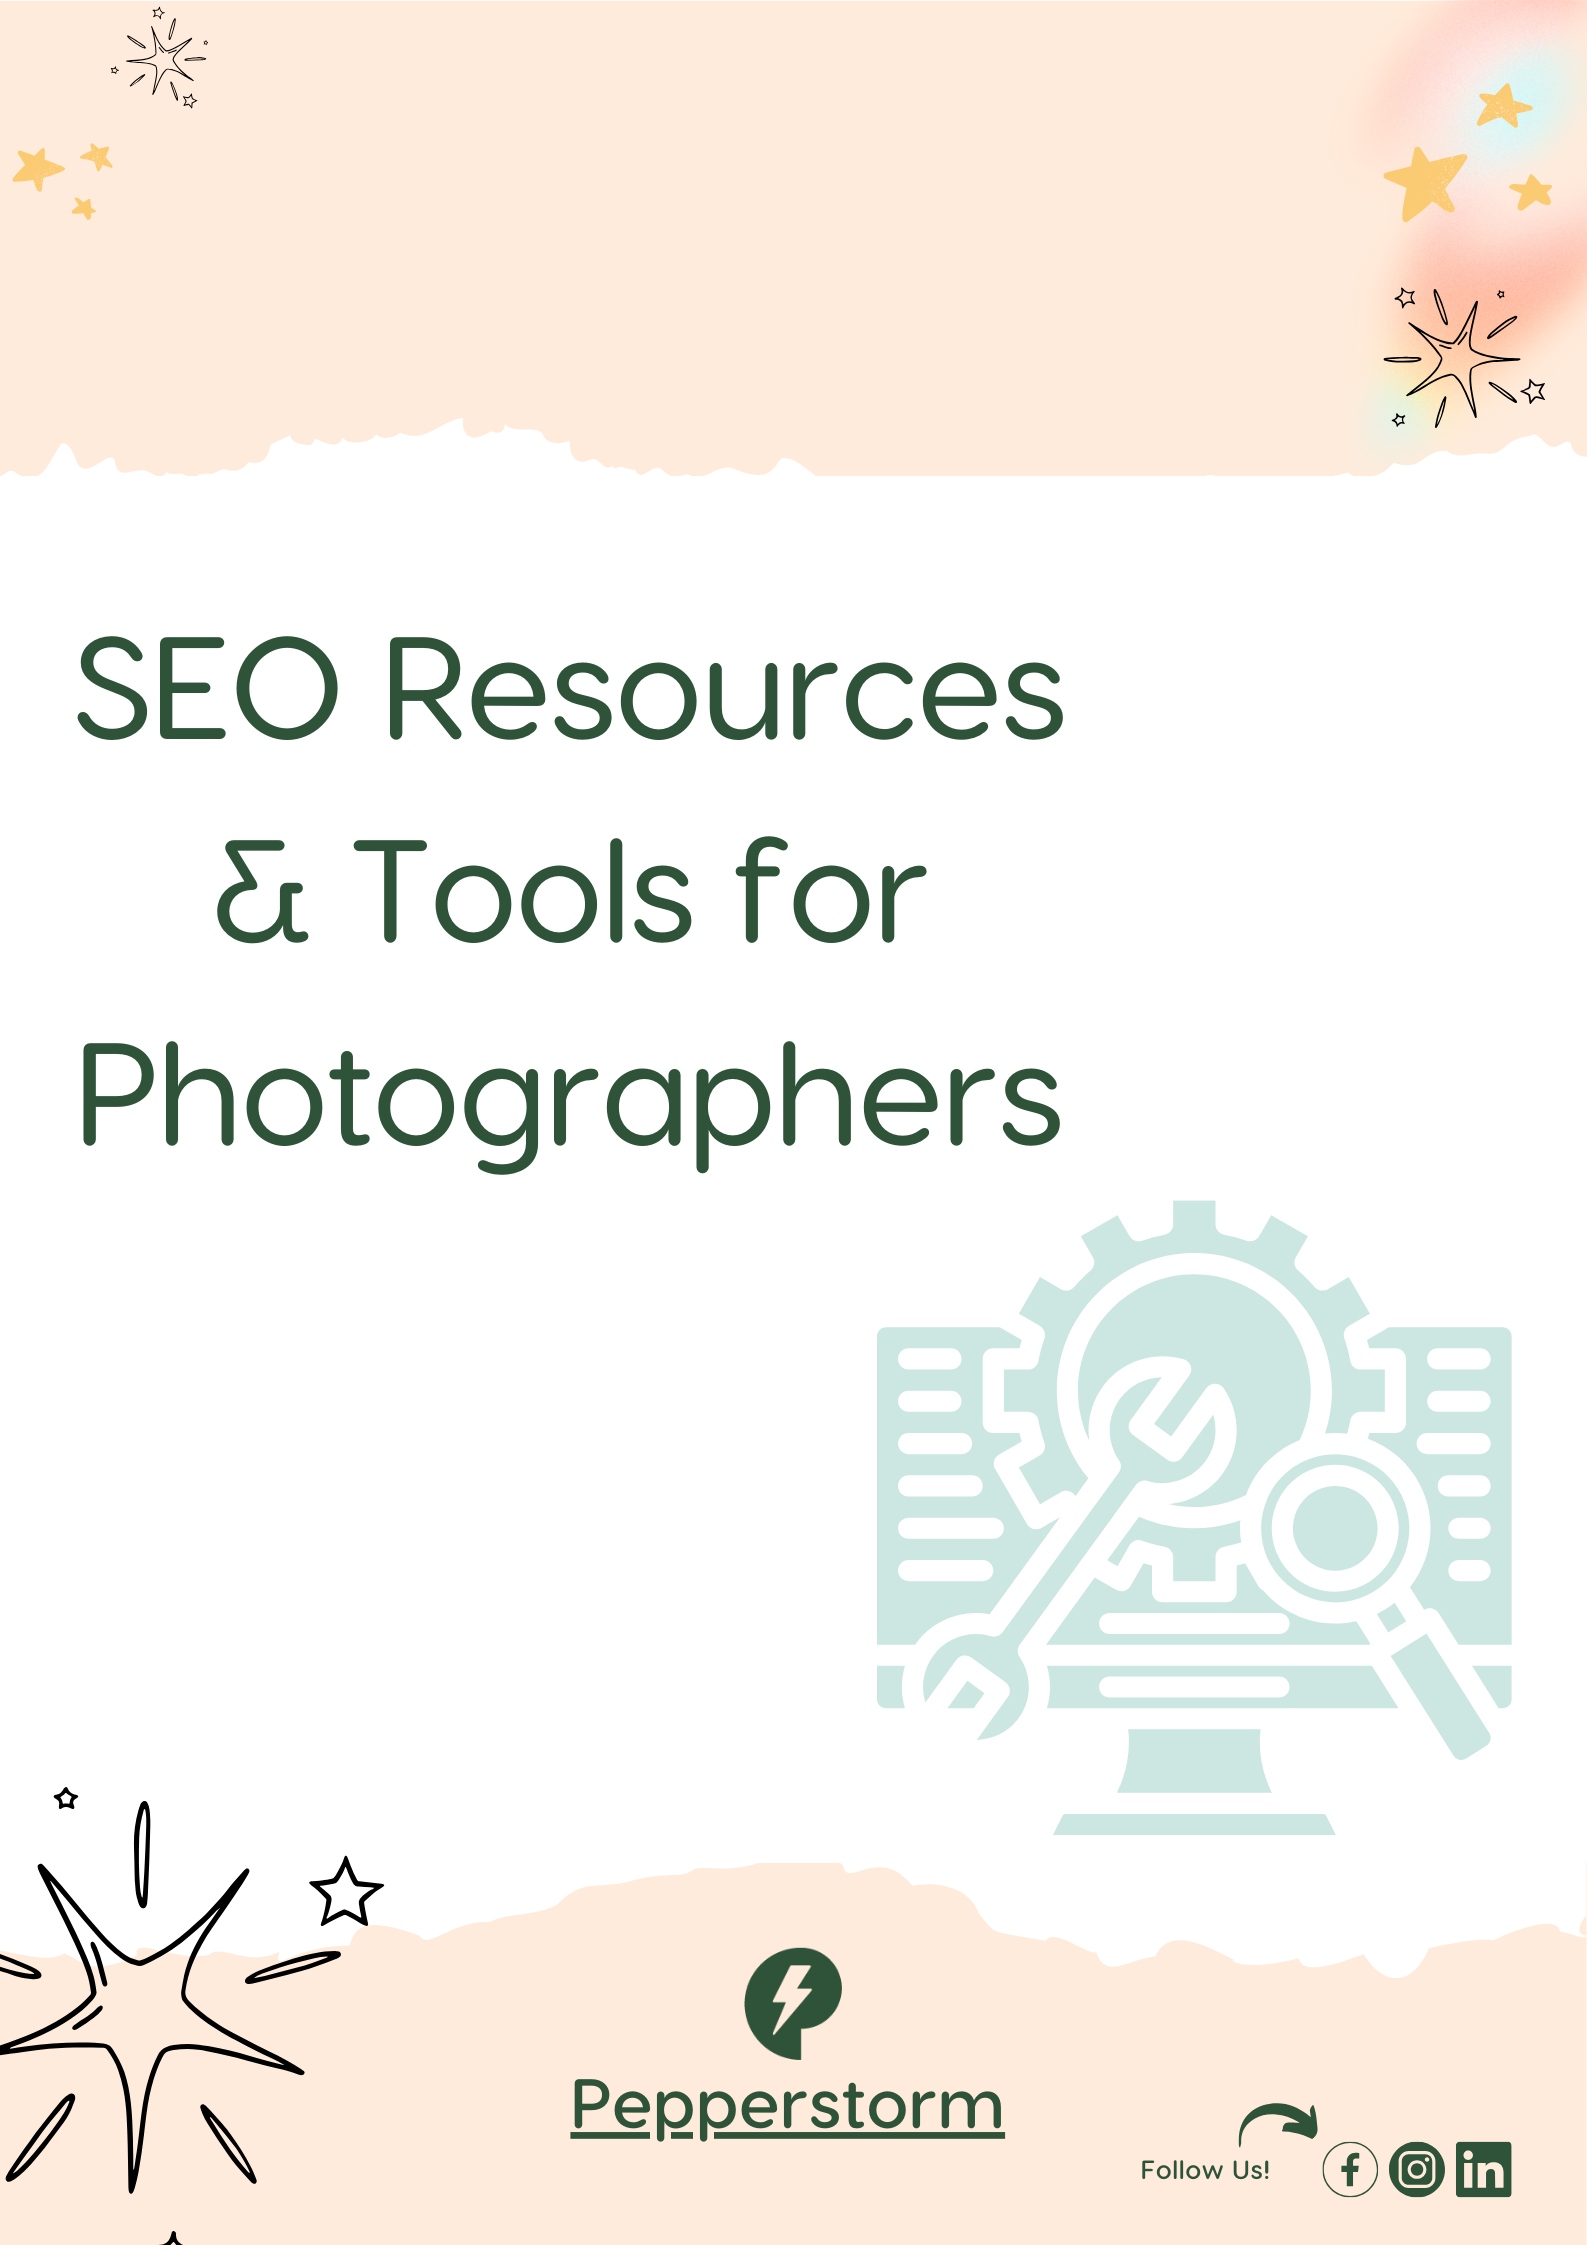 SEO Resources for Photographers